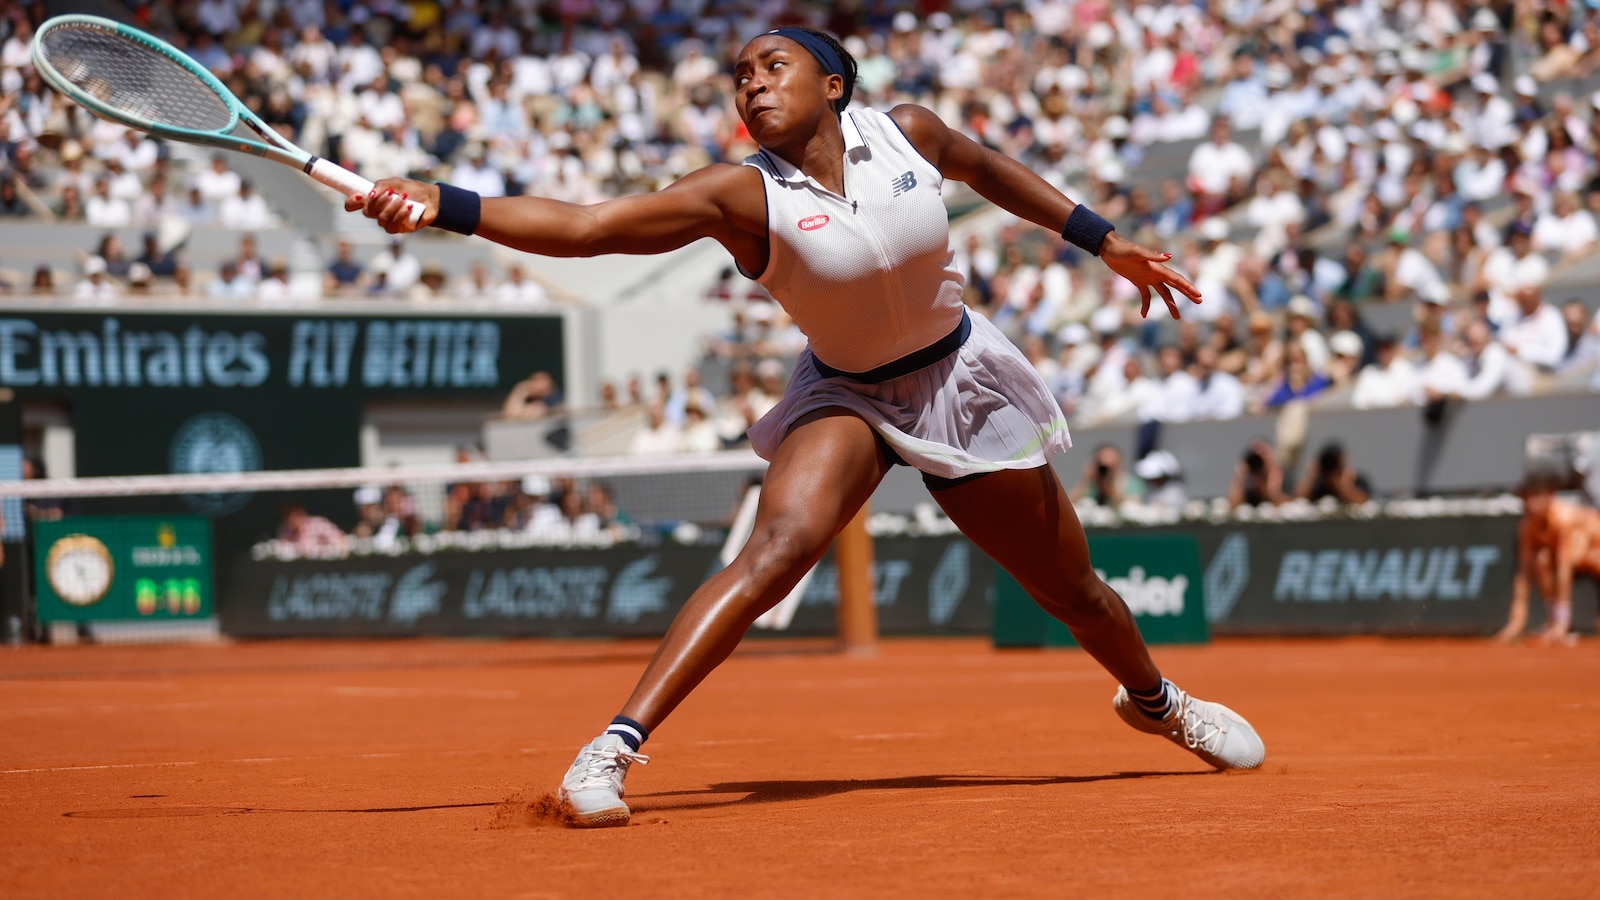 Coco Gauff to be female flag bearer for US team at Olympic opening ceremony